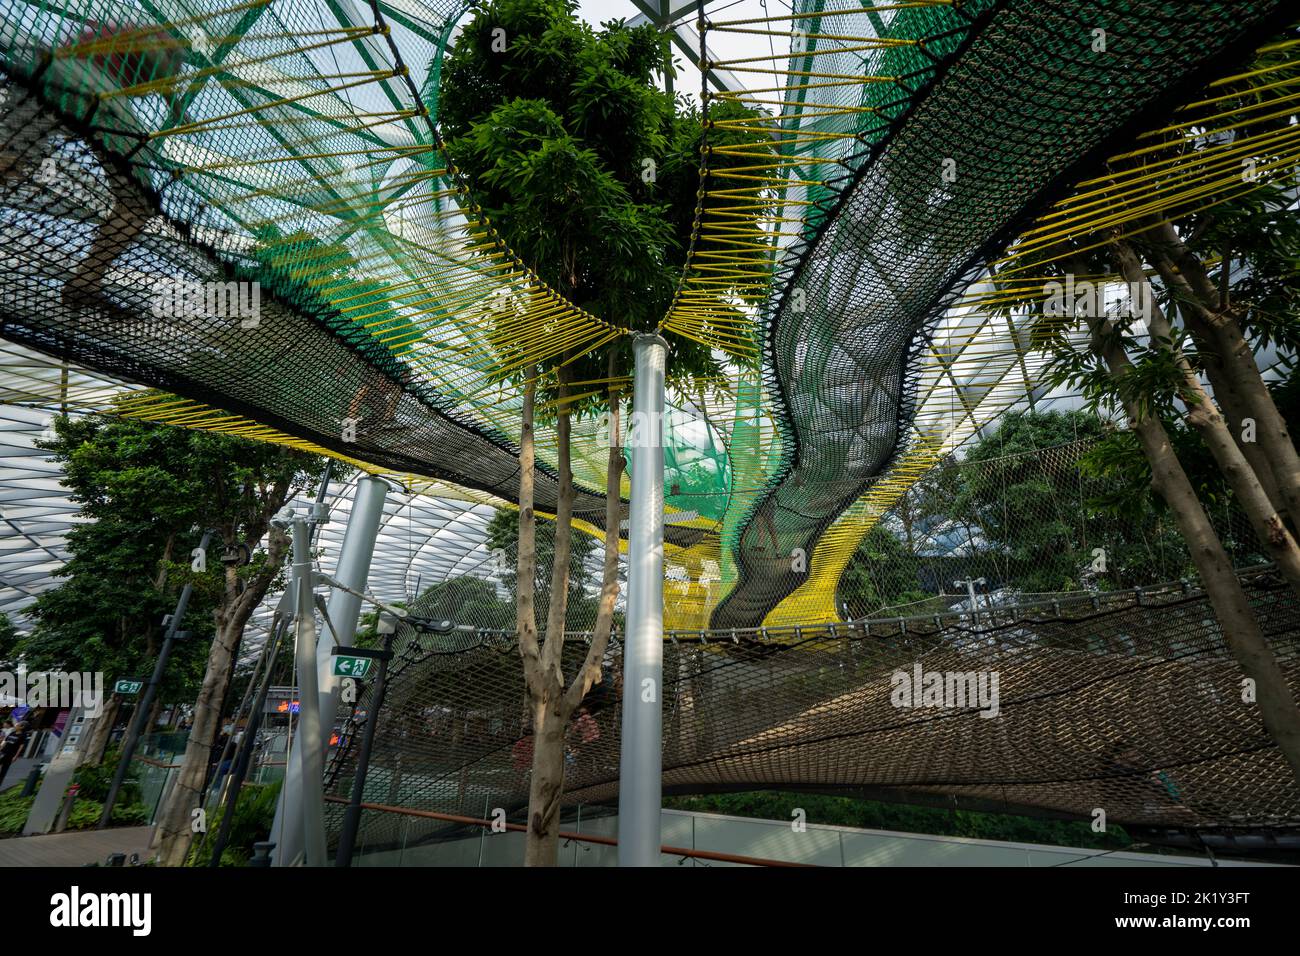 Walking Nets in the Çanopy Park at Jewel Changi Airport terminal, Singapore Stock Photo